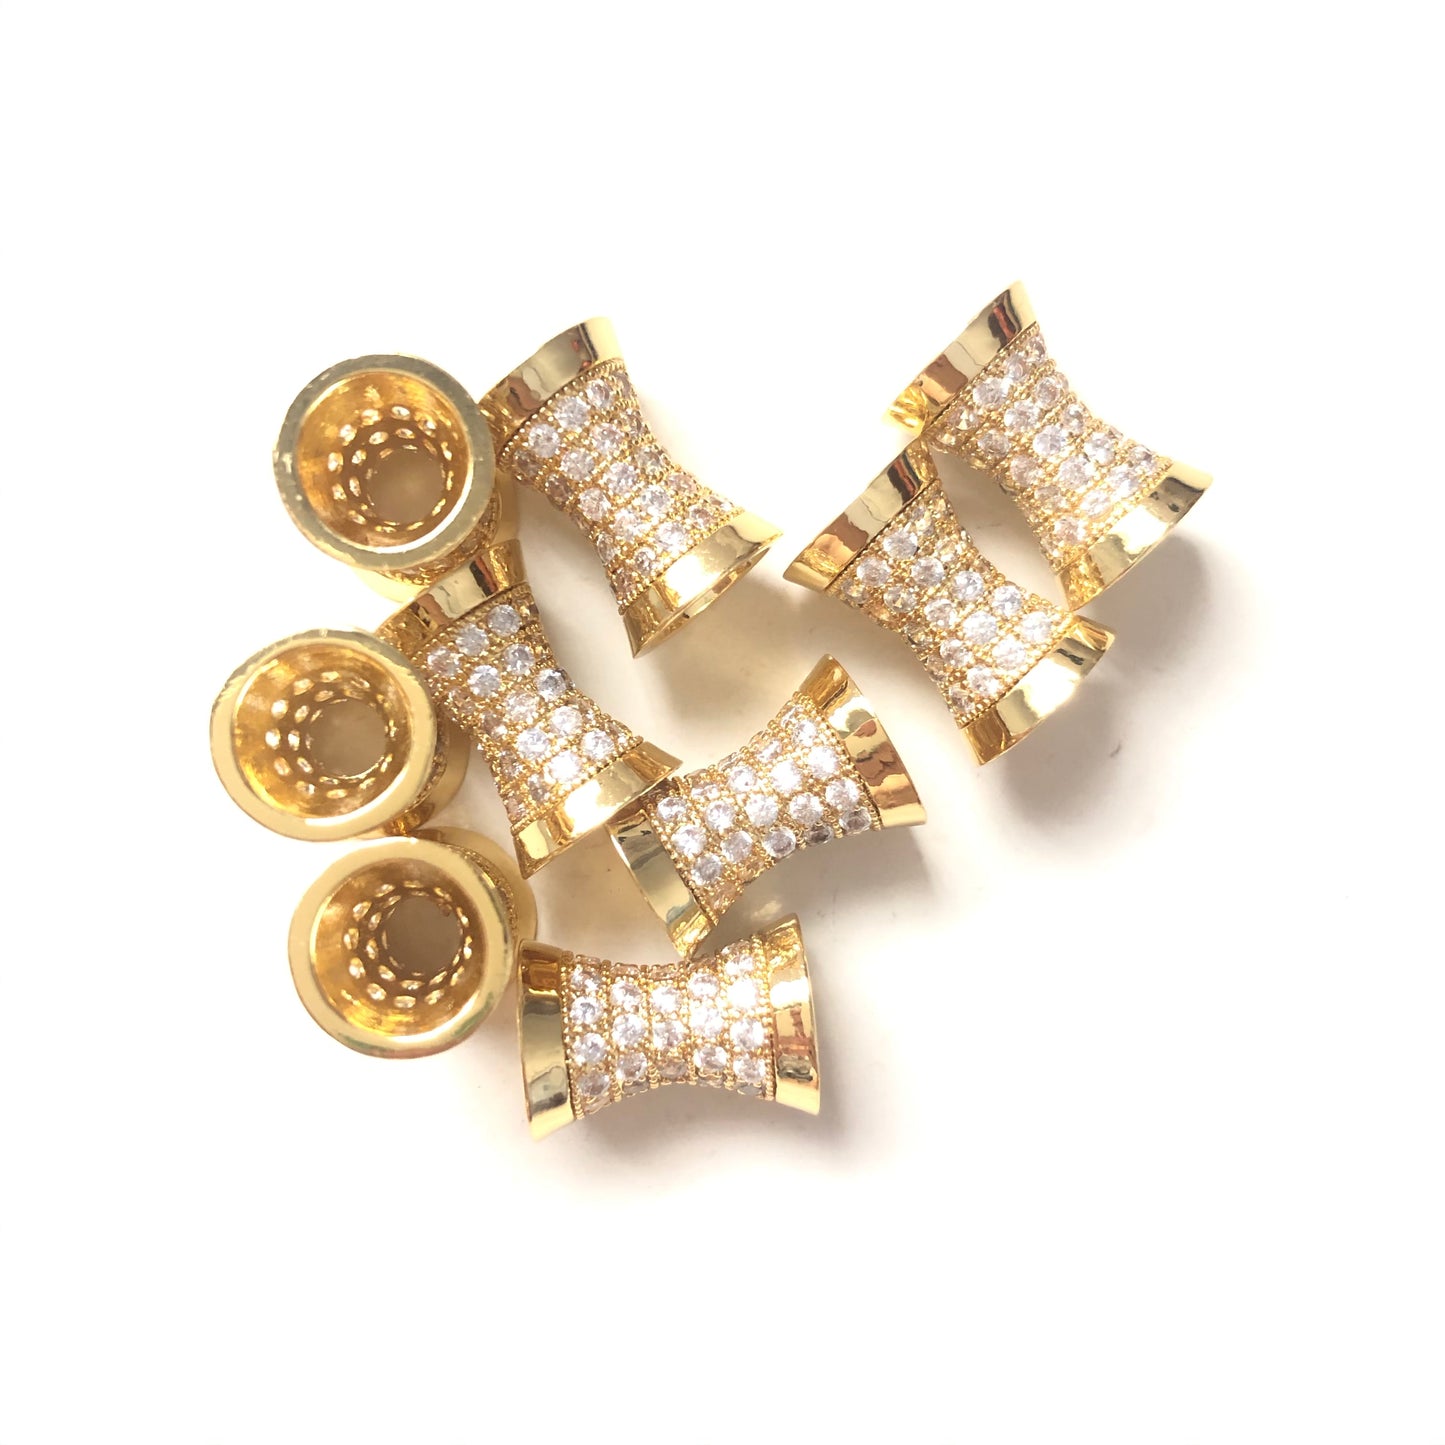 20pcs/lot 13.8*9.7mm CZ Paved Hourglass Spacers Gold CZ Paved Spacers Hourglass Beads Charms Beads Beyond